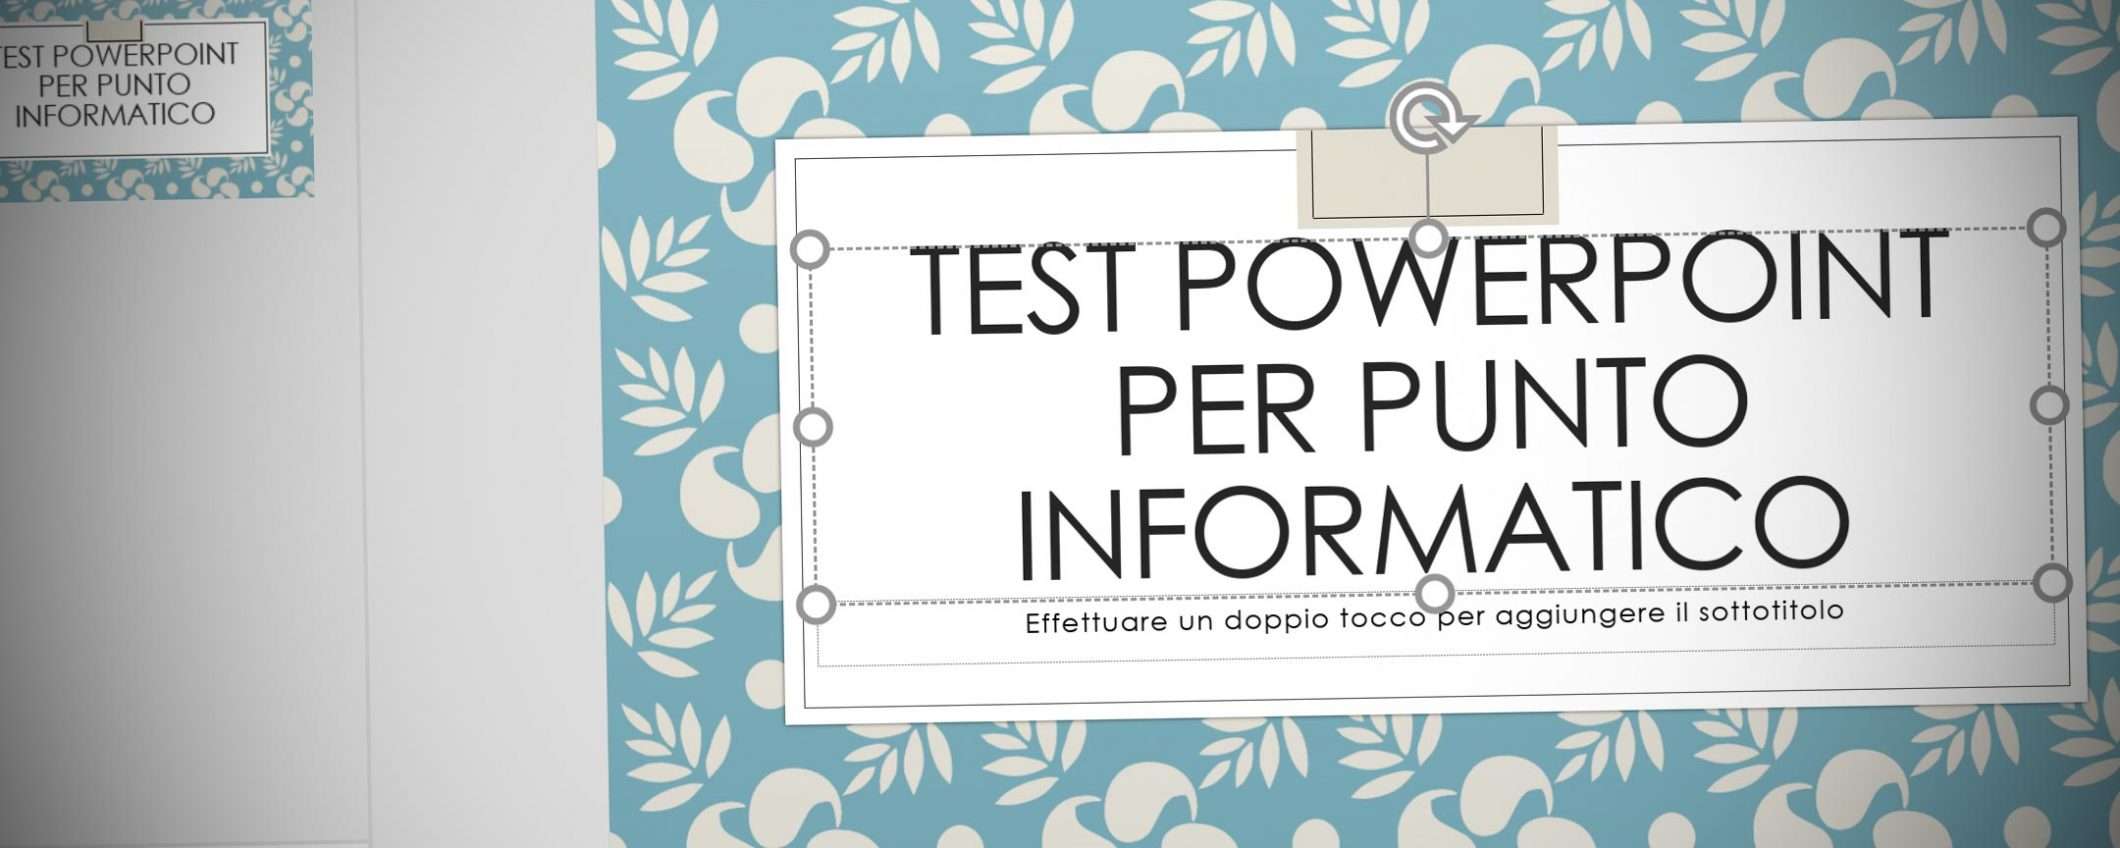 Nuovo Office per Android: ecco PowerPoint